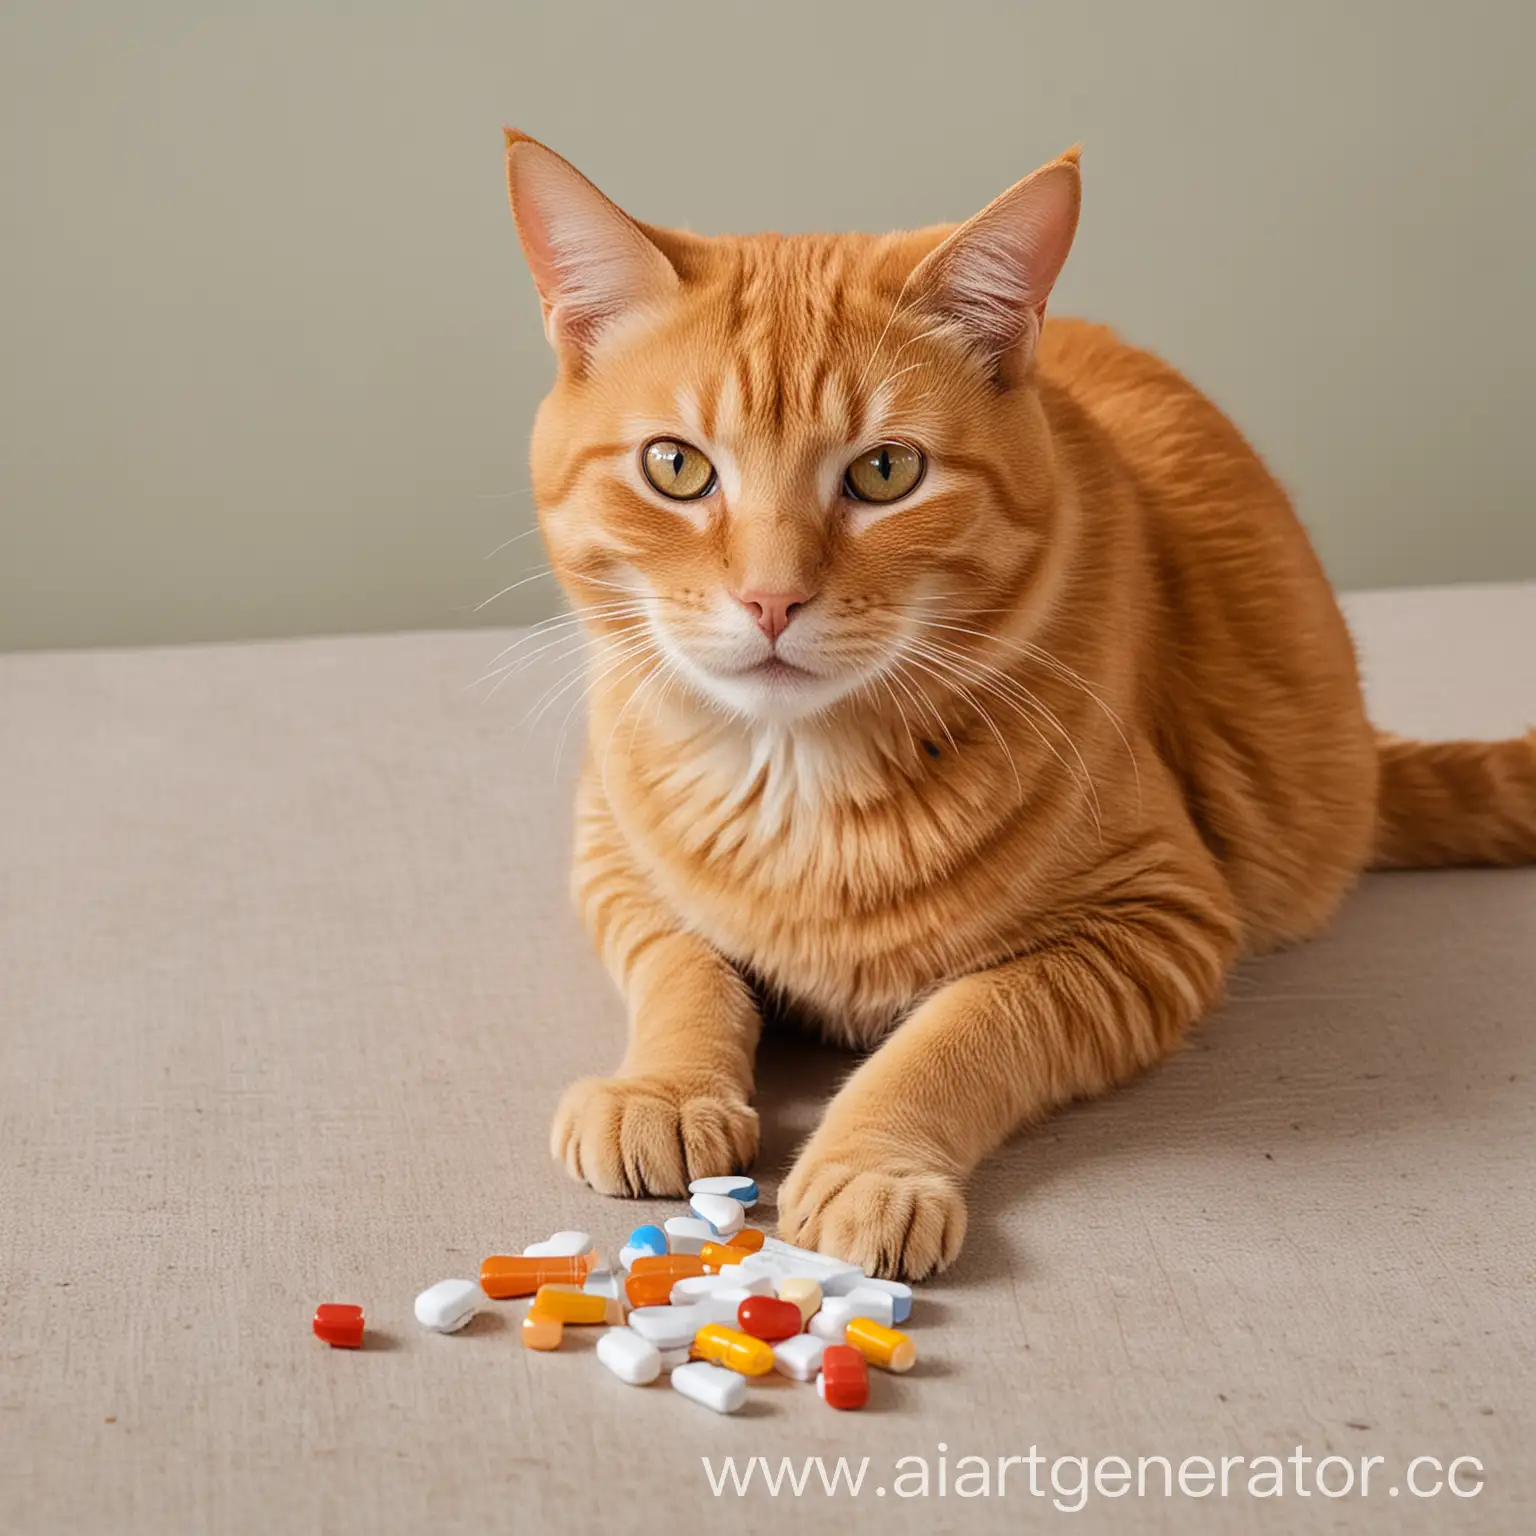 Ginger-Cat-with-Medications-in-Cozy-Home-Setting